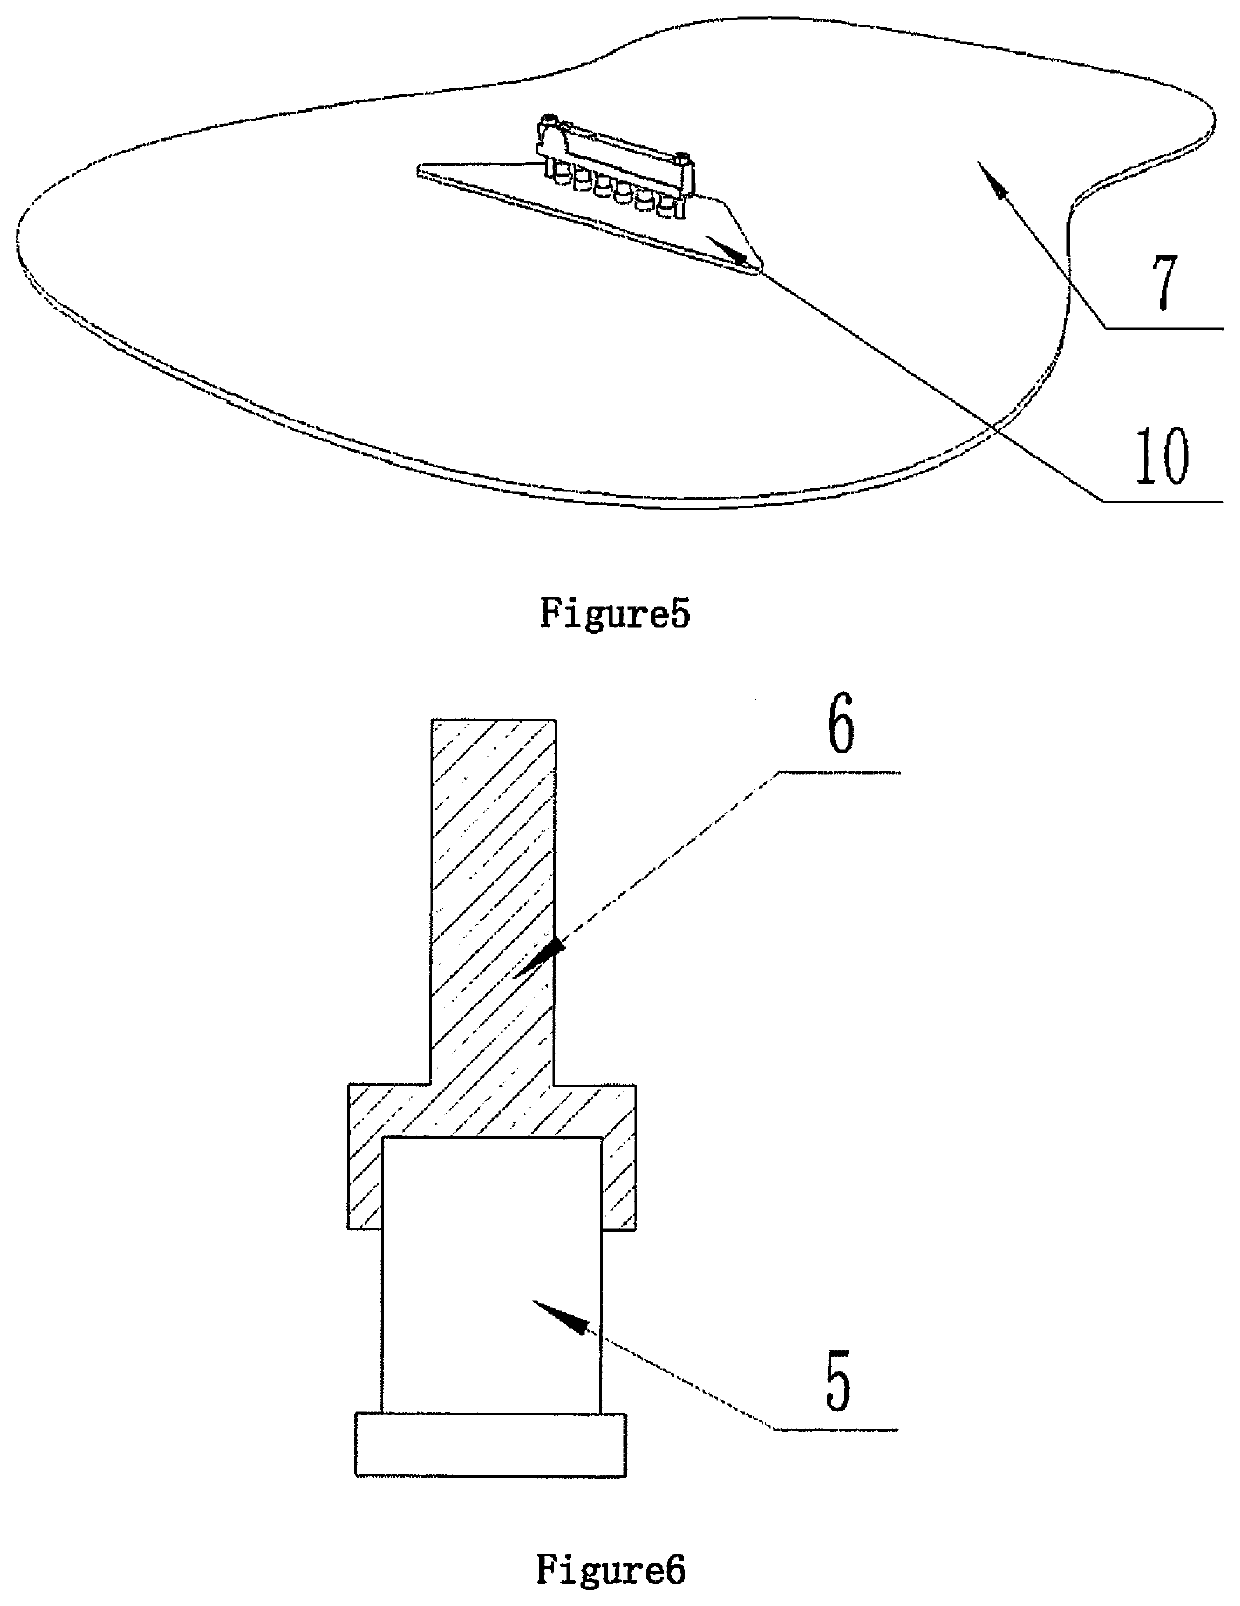 Electronic Sensor Device for Detecting the Vibration Related to an Amplification System within Stringed Musical Instruments